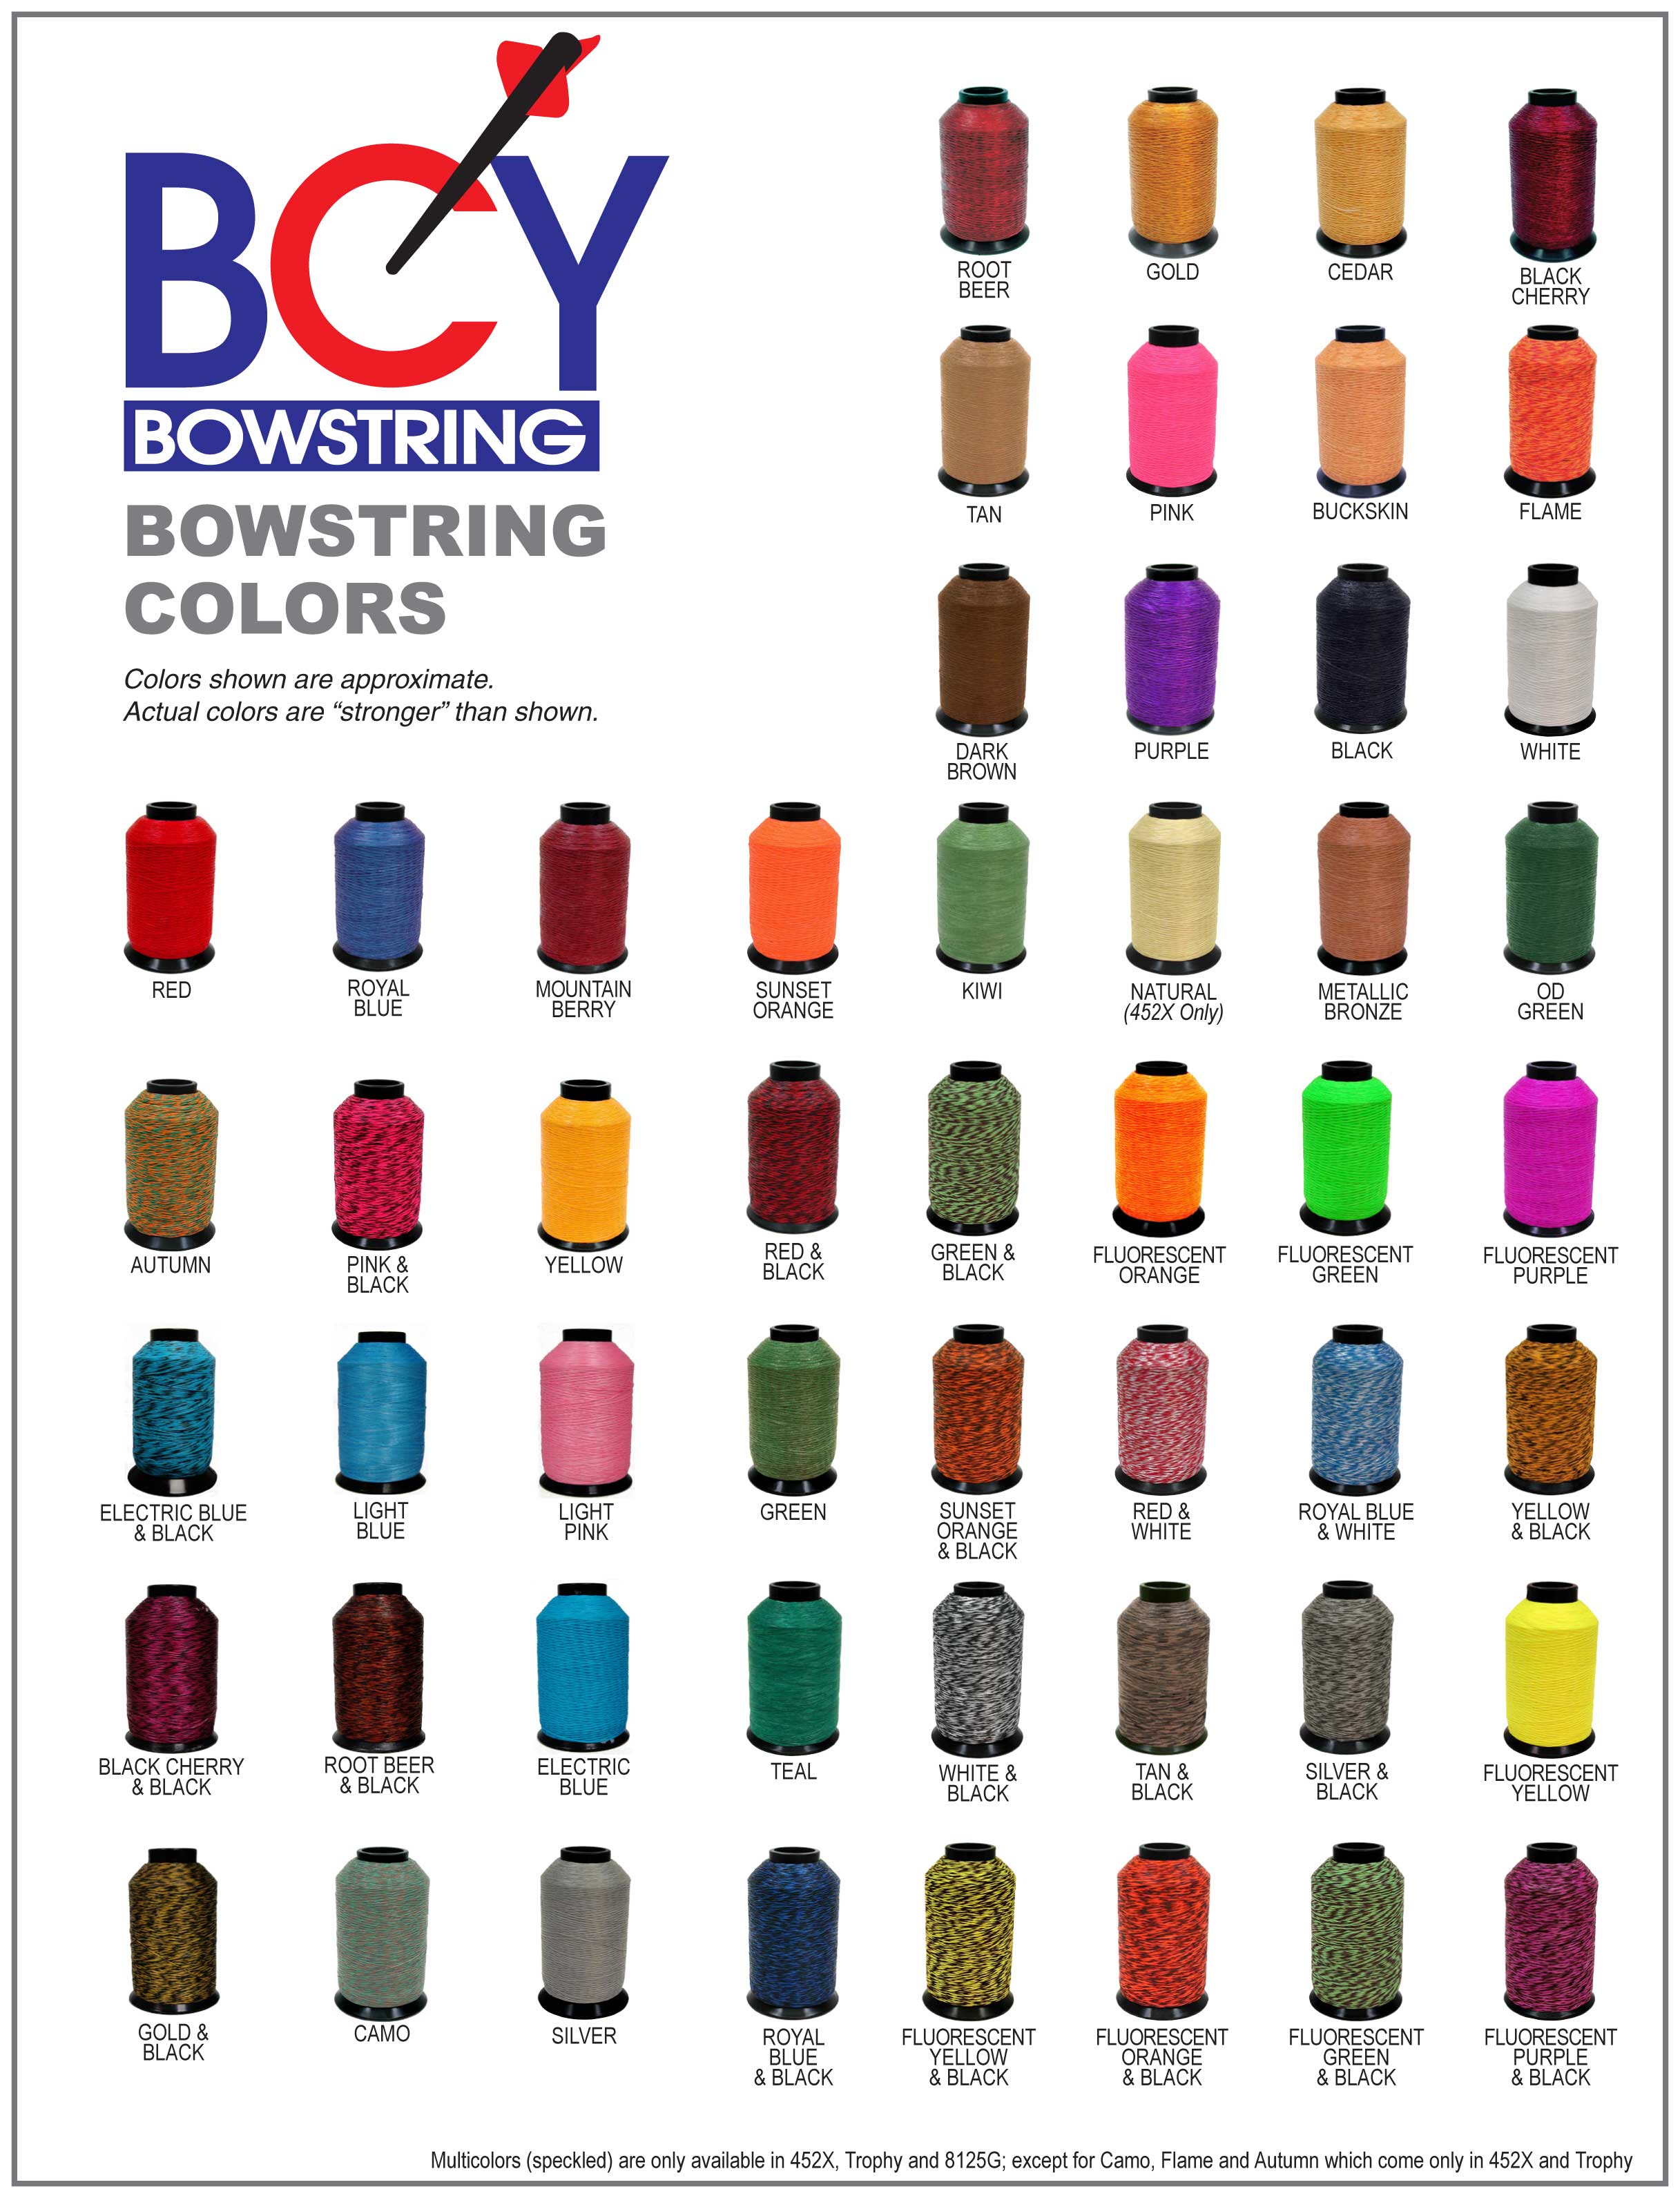 Bow String Color Combinations | vlr.eng.br